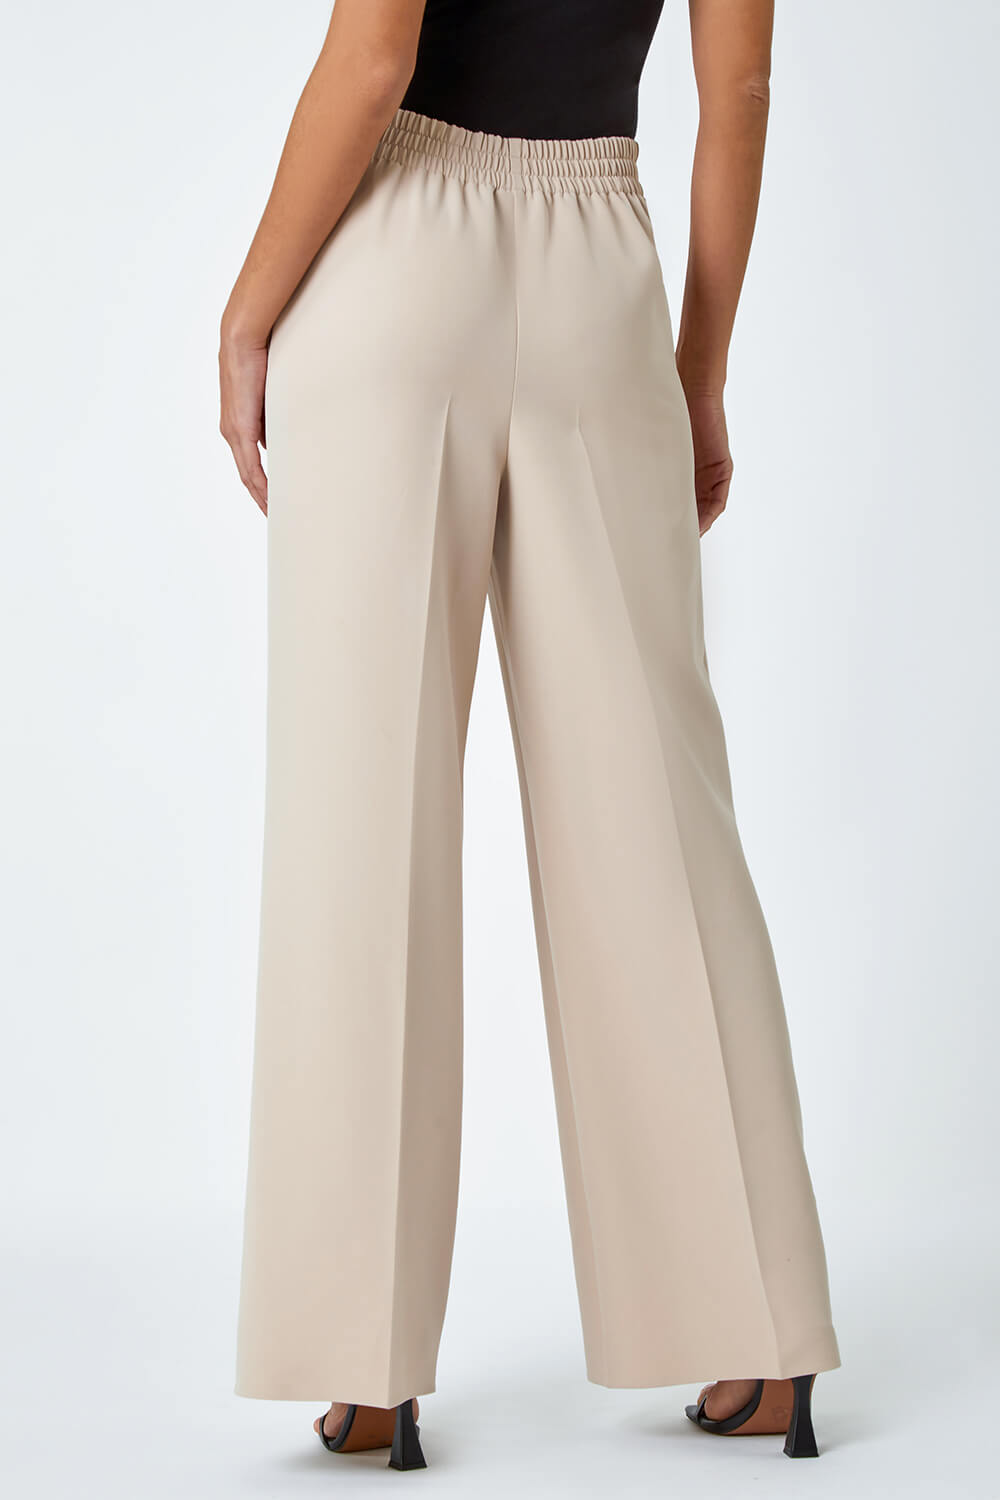 Stone Wide Leg Tie Front Stretch Trouser, Image 3 of 5